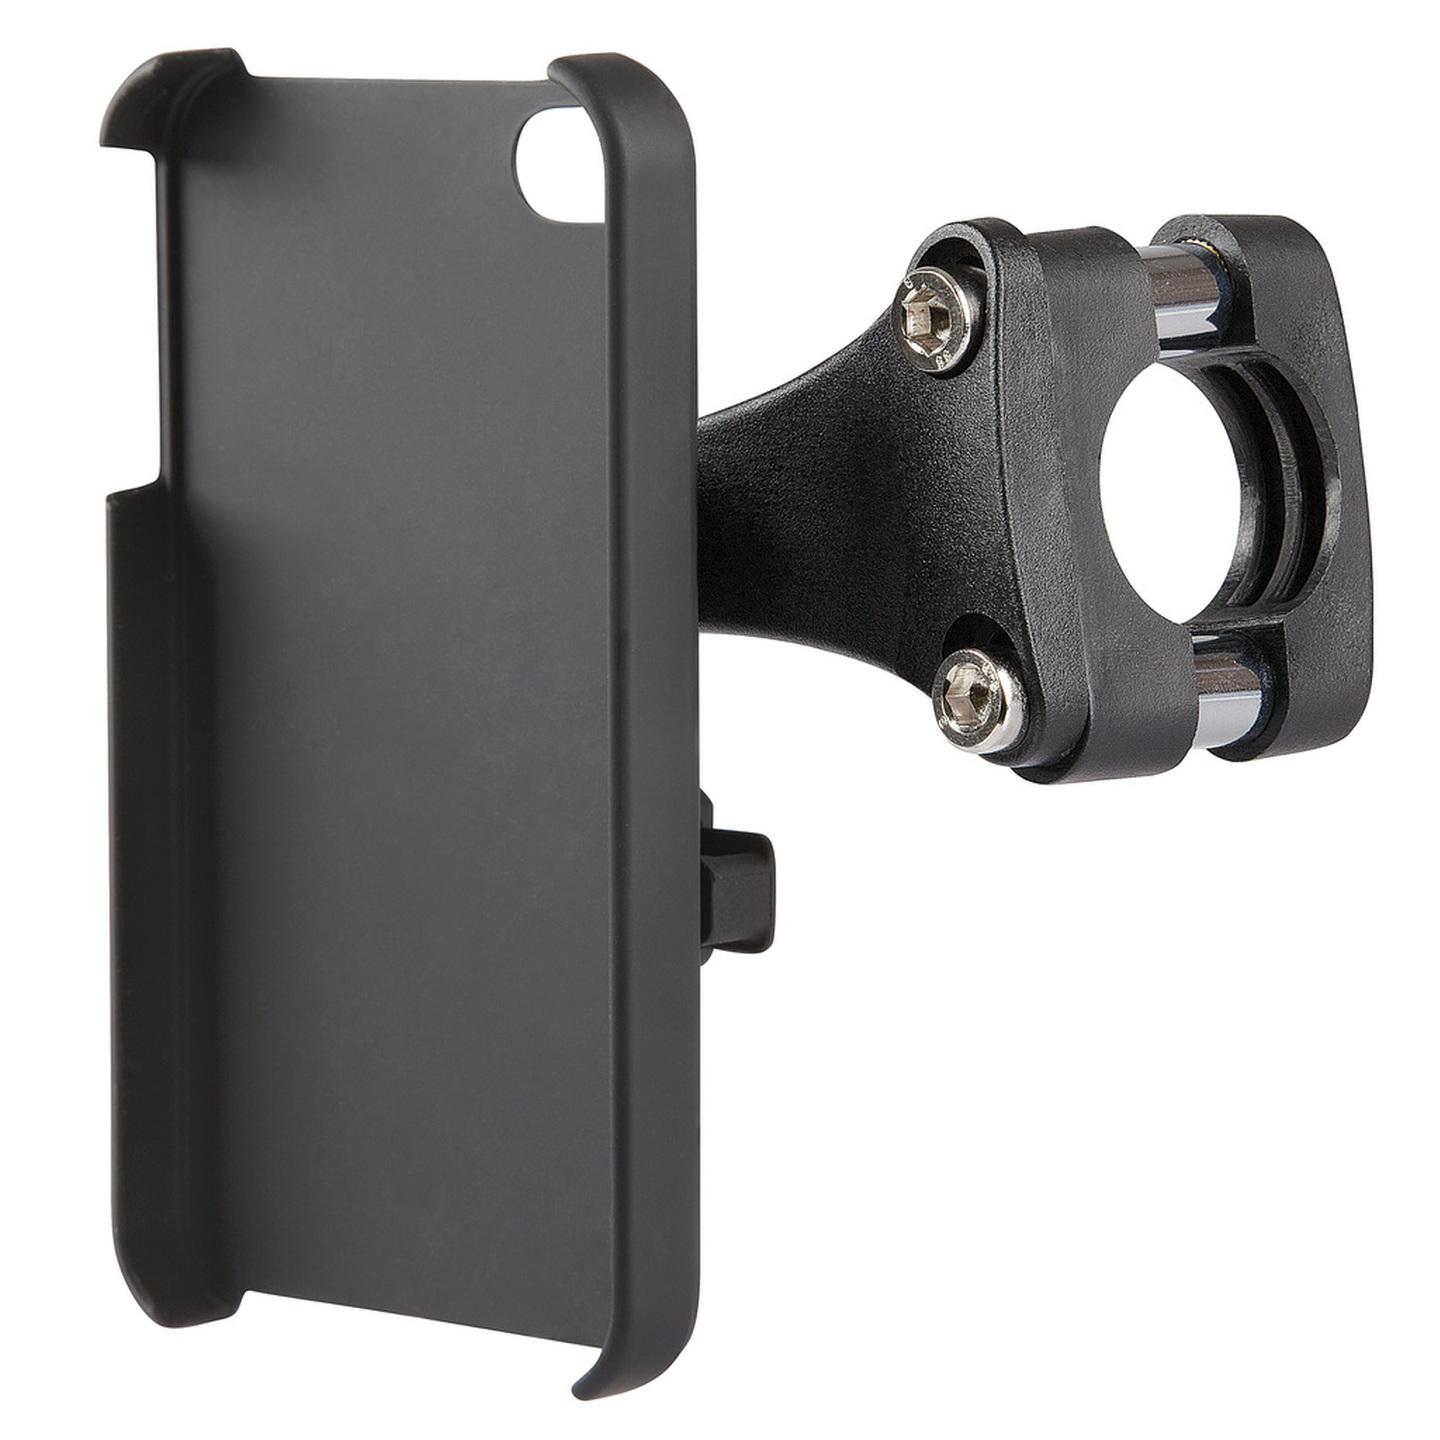 Bicycle Bracket Mount for iPhone 3G/3GS/4/4S